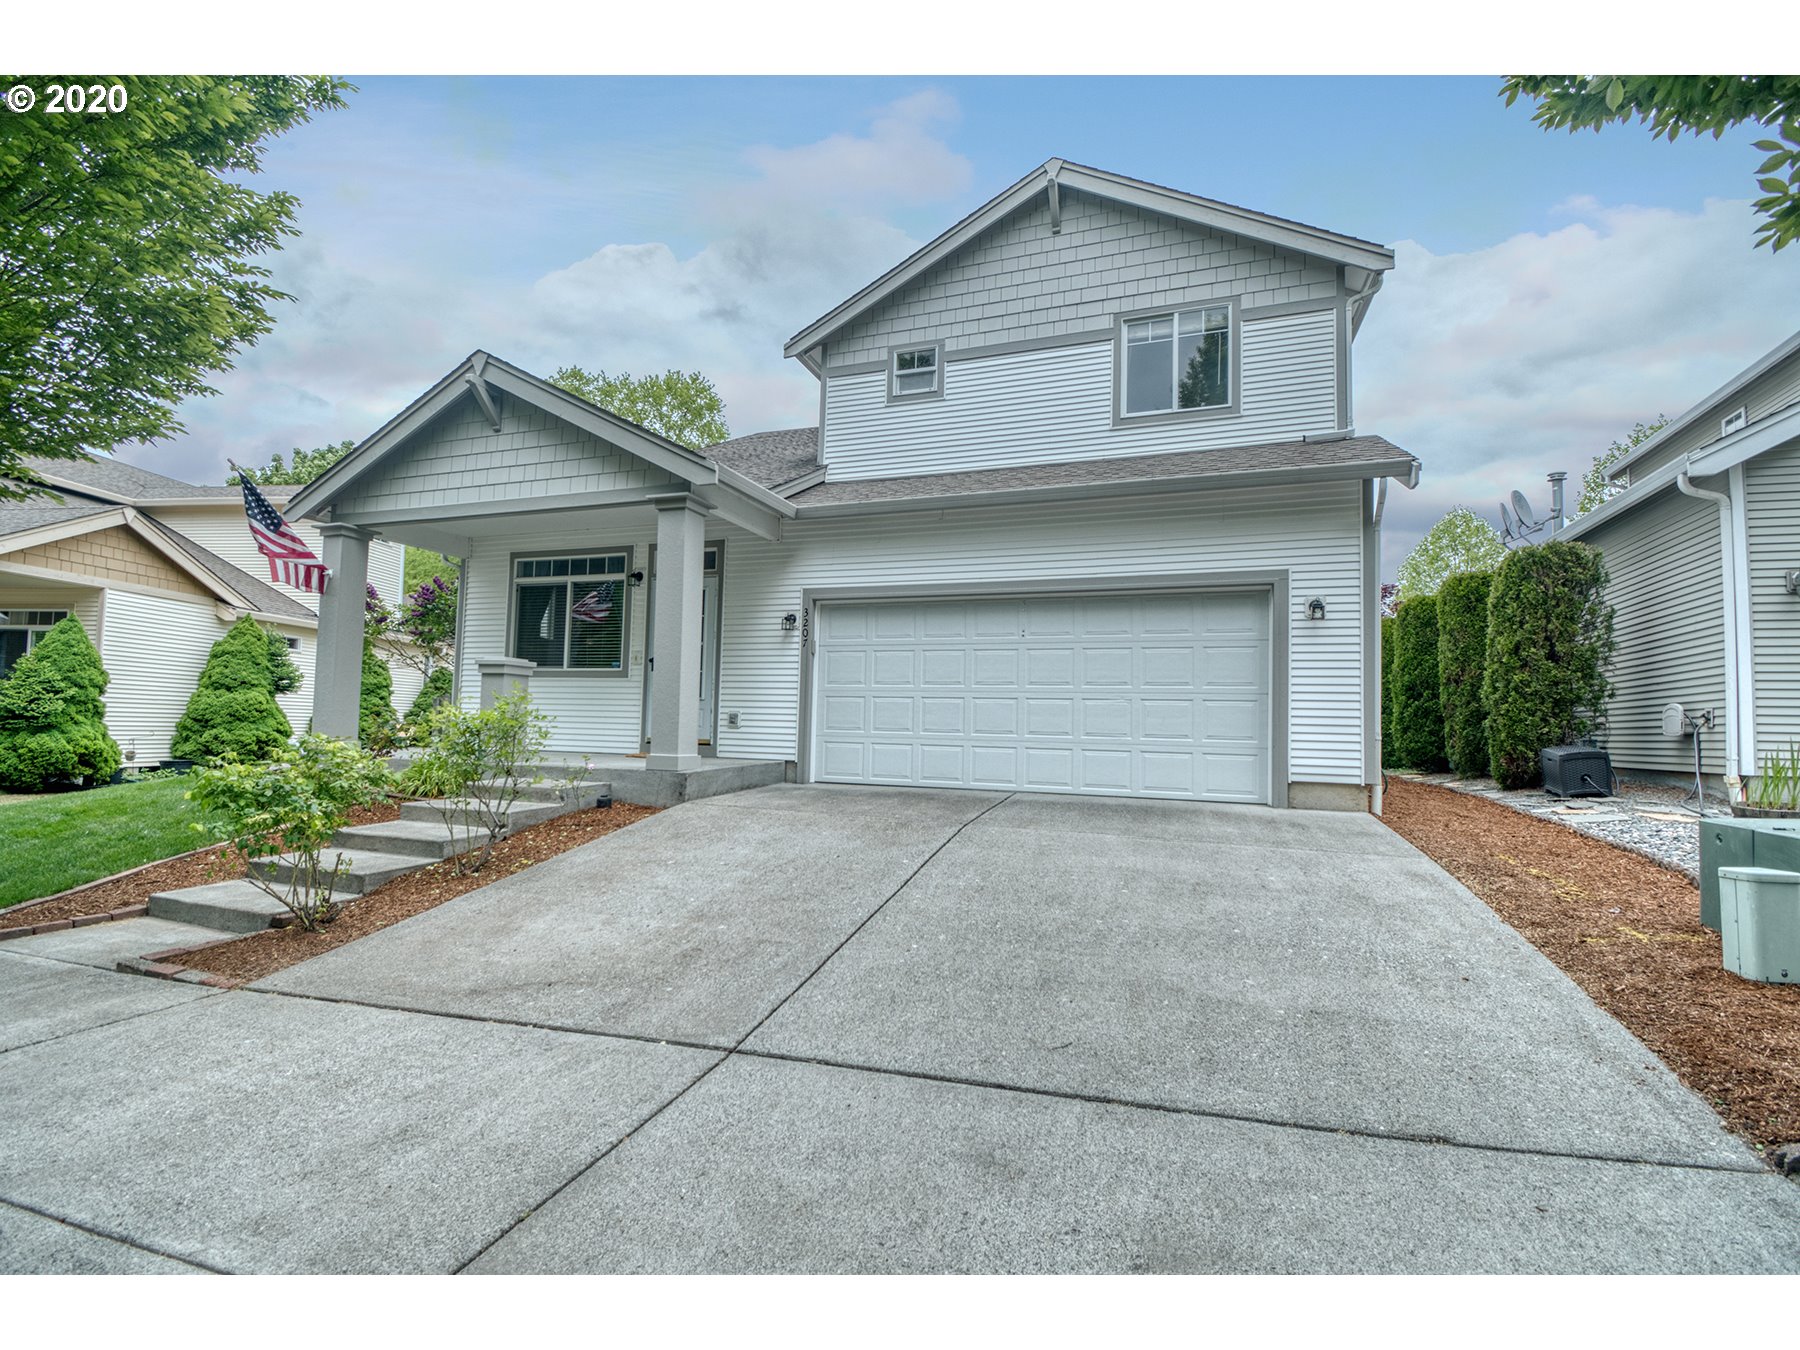 3207 SE 195TH AVE (1 of 22)